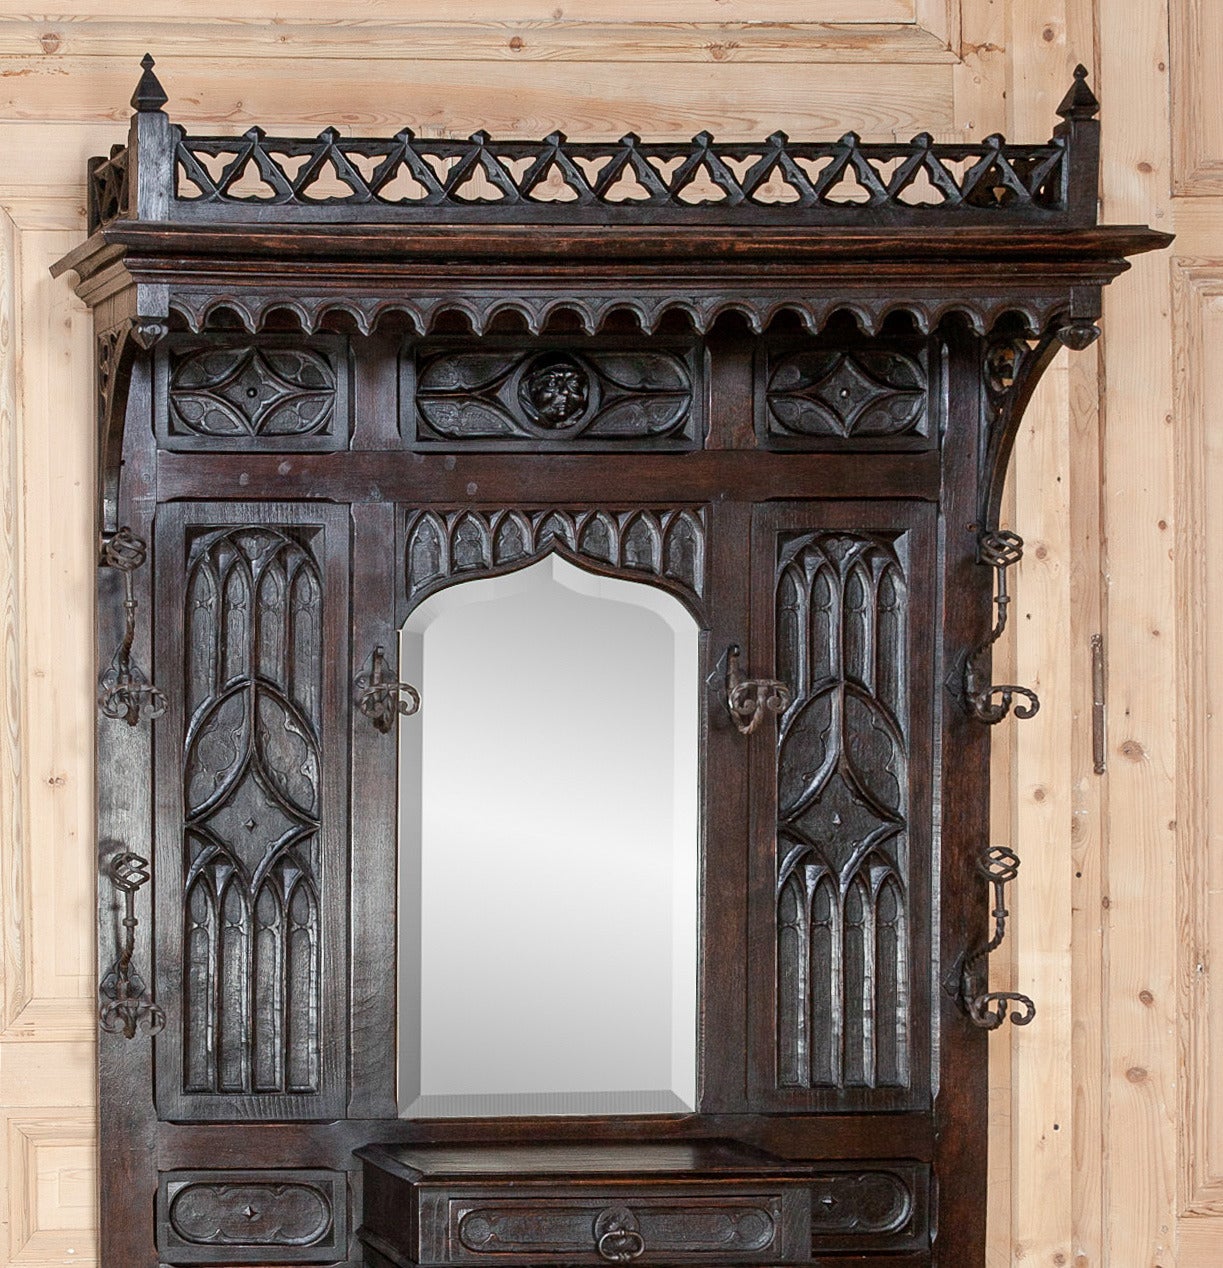 Handcrafted from dense, old-growth oak, this handsome, French Gothic hall tree features its original hand-beveled mirror and wrought iron hangers and umbrella rack! A simplistic interpretation of the style includes trefoils pierced into the crown's